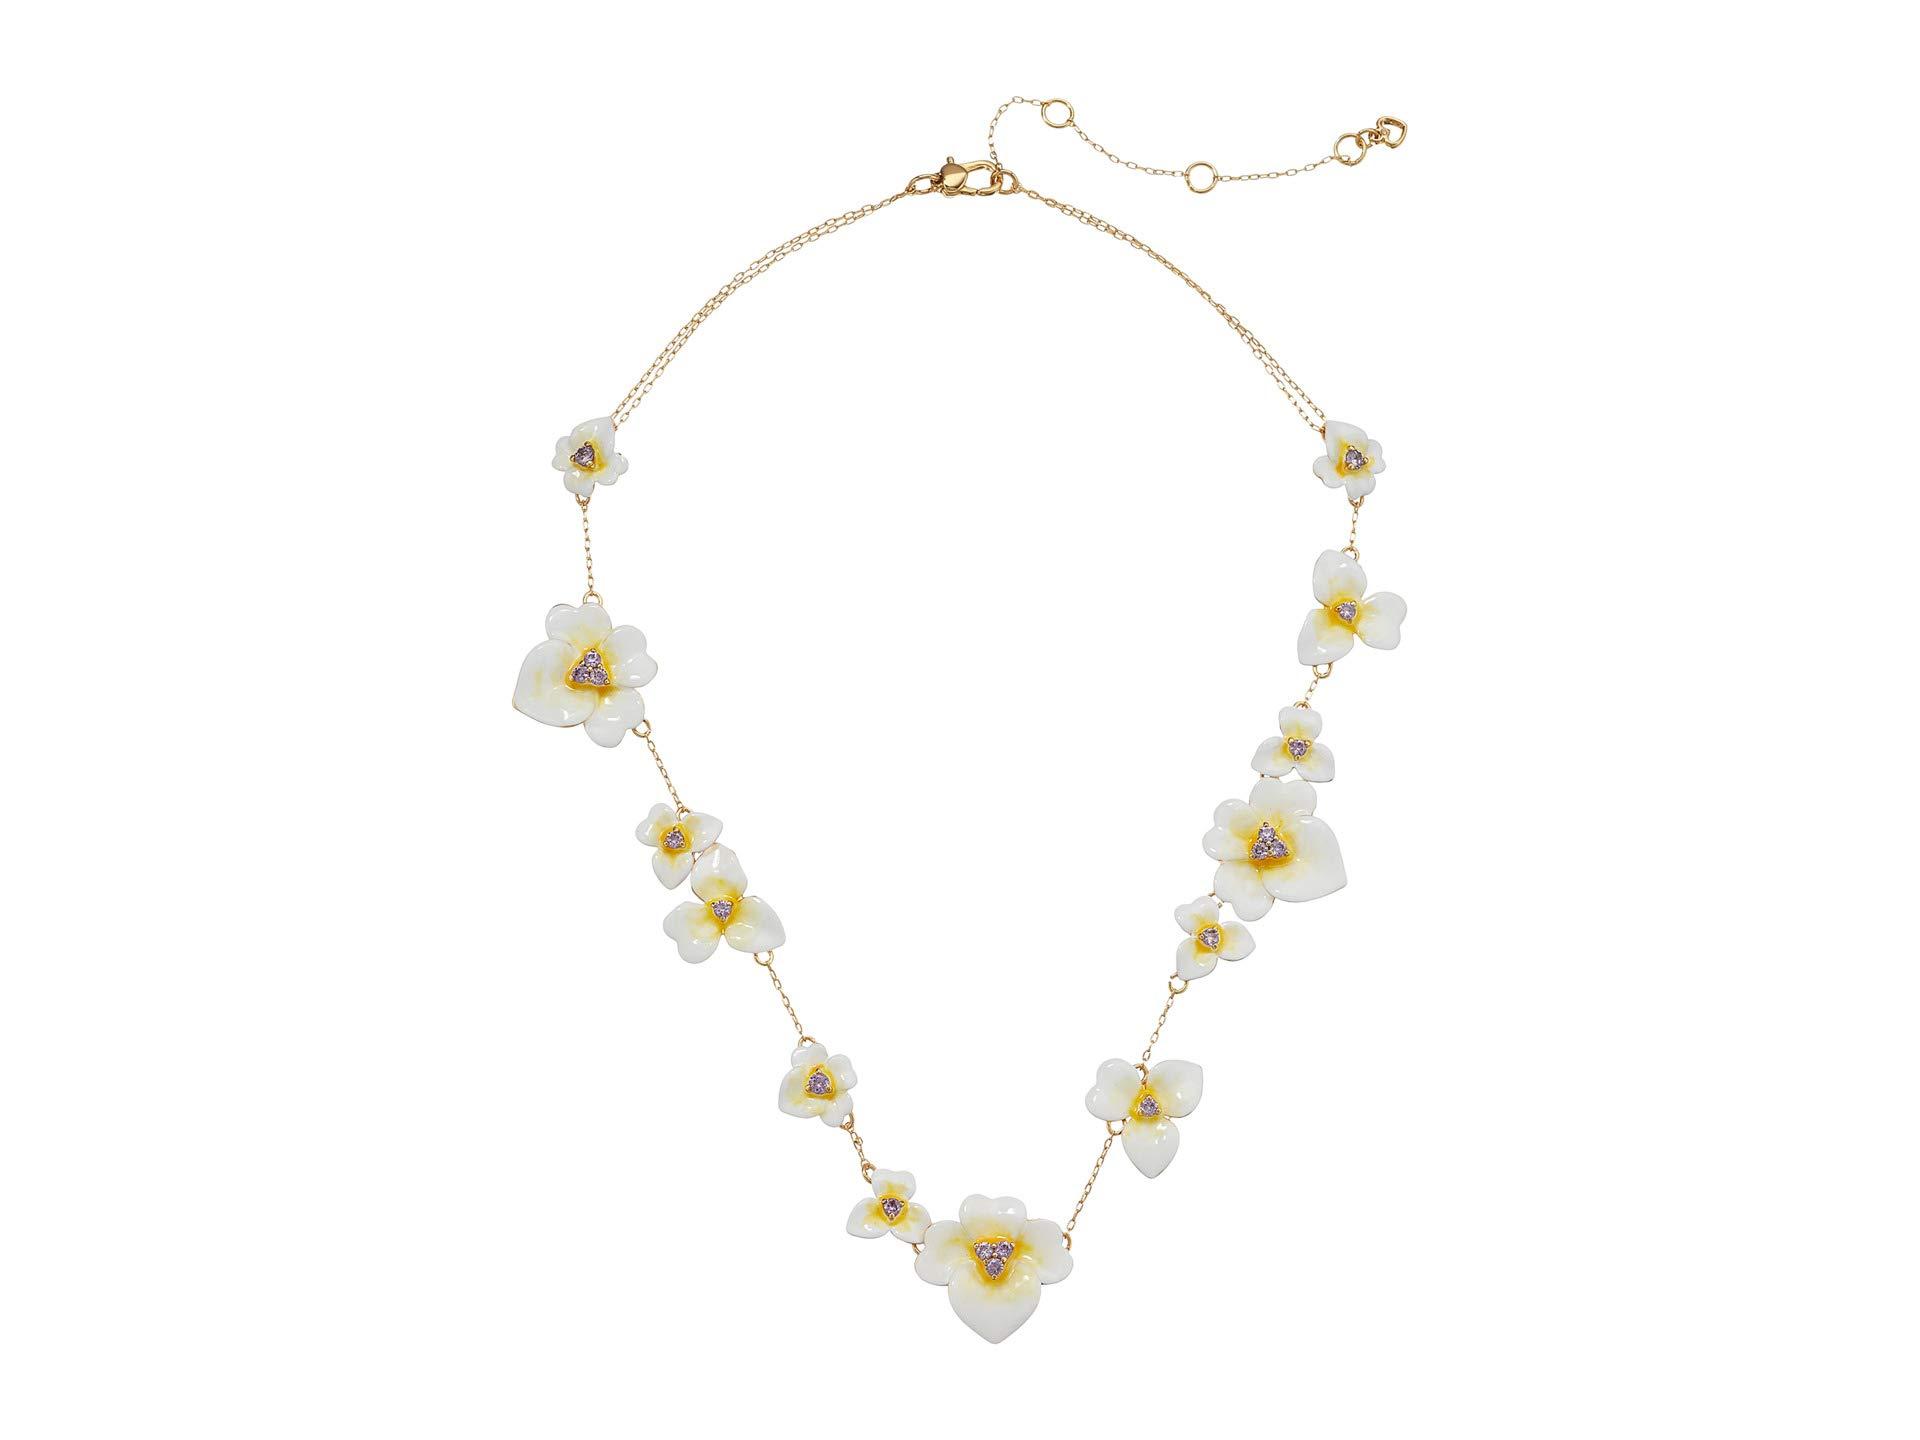 Kate Spade Precious Pansy Enamel Scatter Necklace in Yellow - Lyst